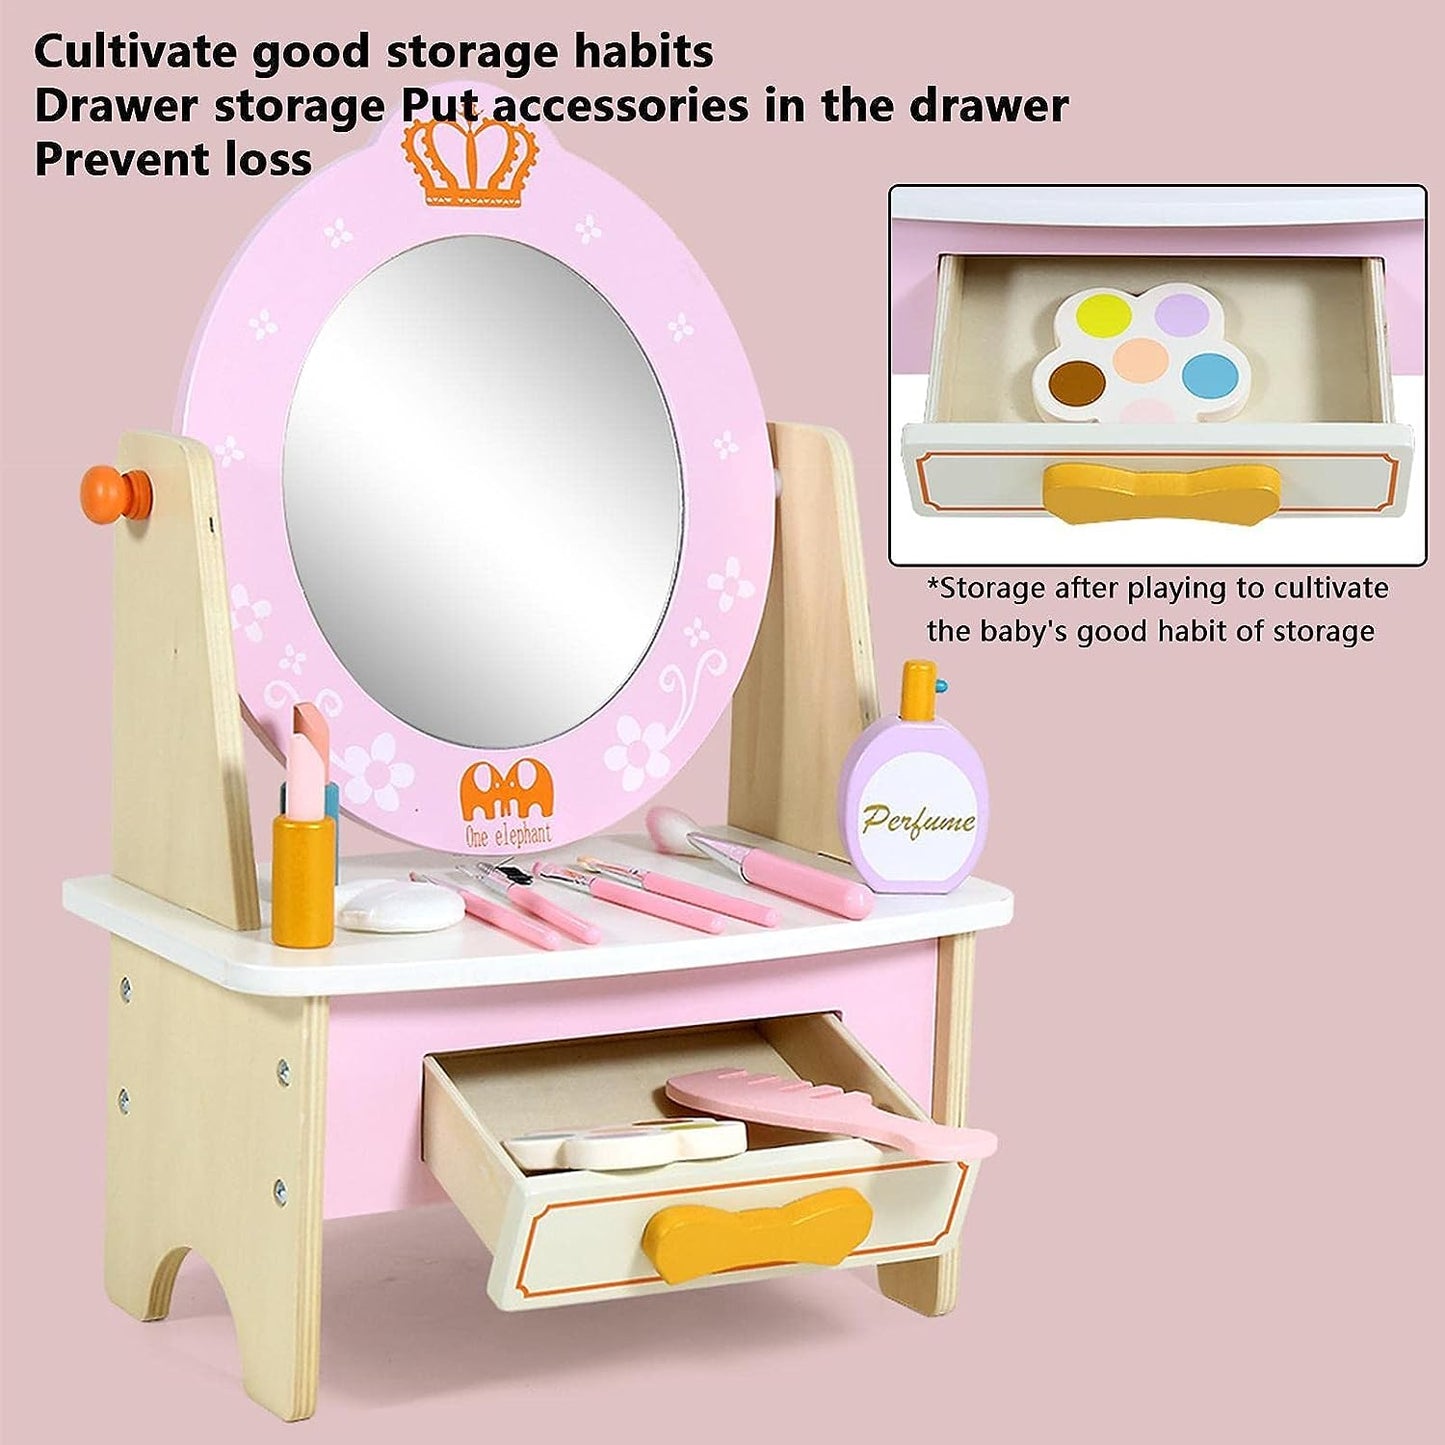 Wooden Medium Dressing Table Toy for Girls